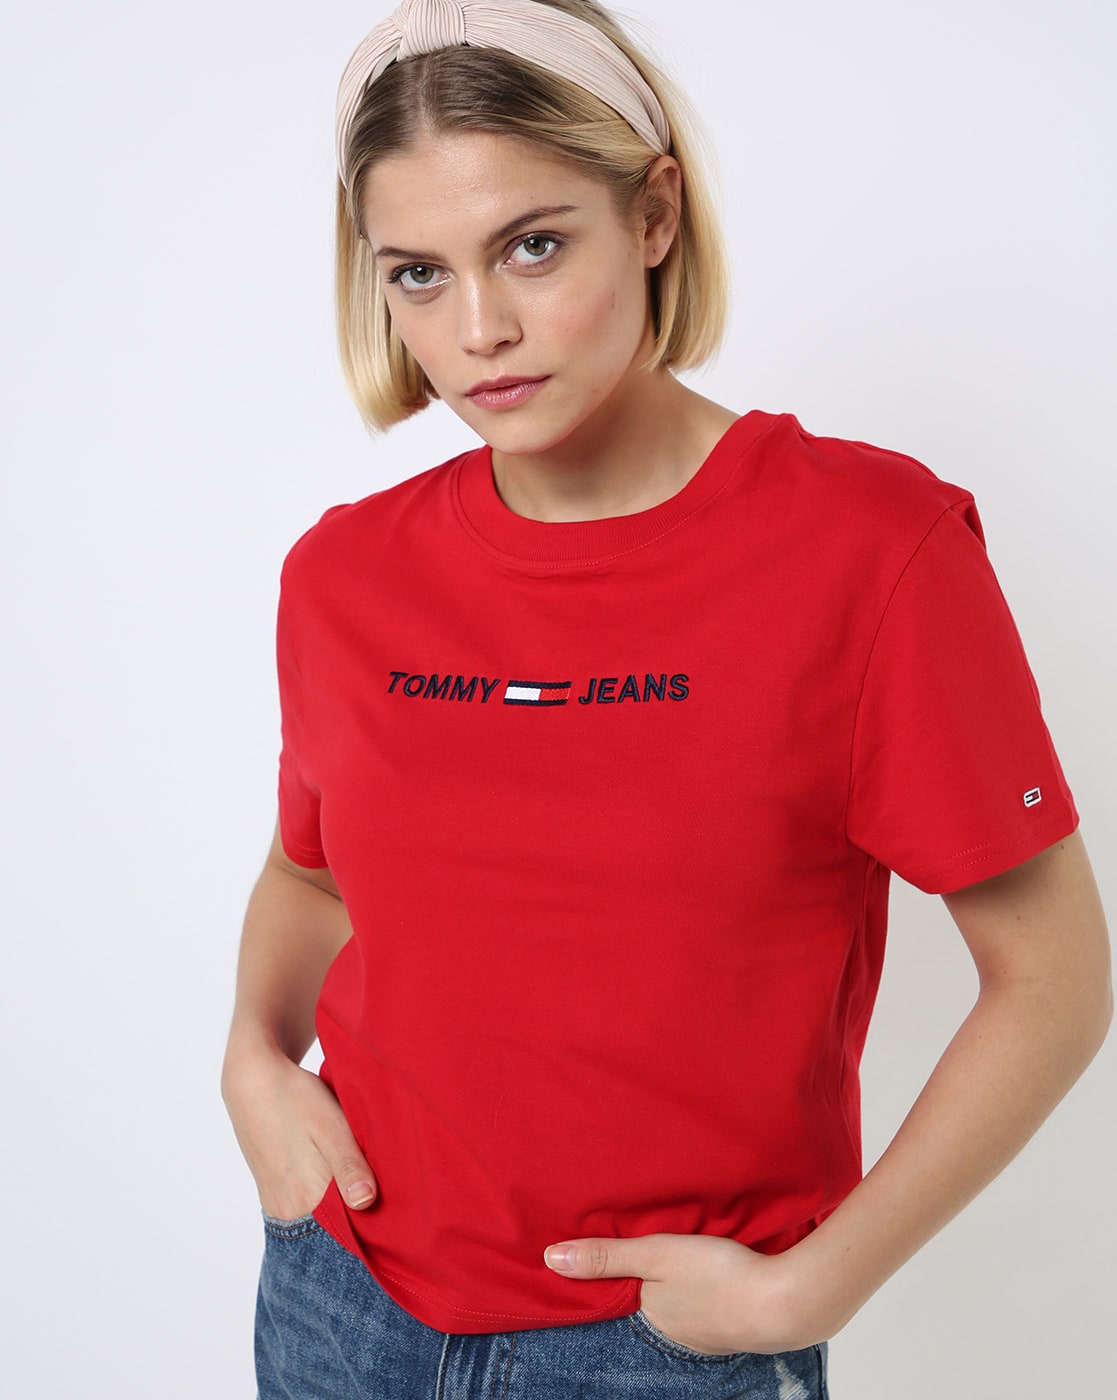 tommy jeans red shirt